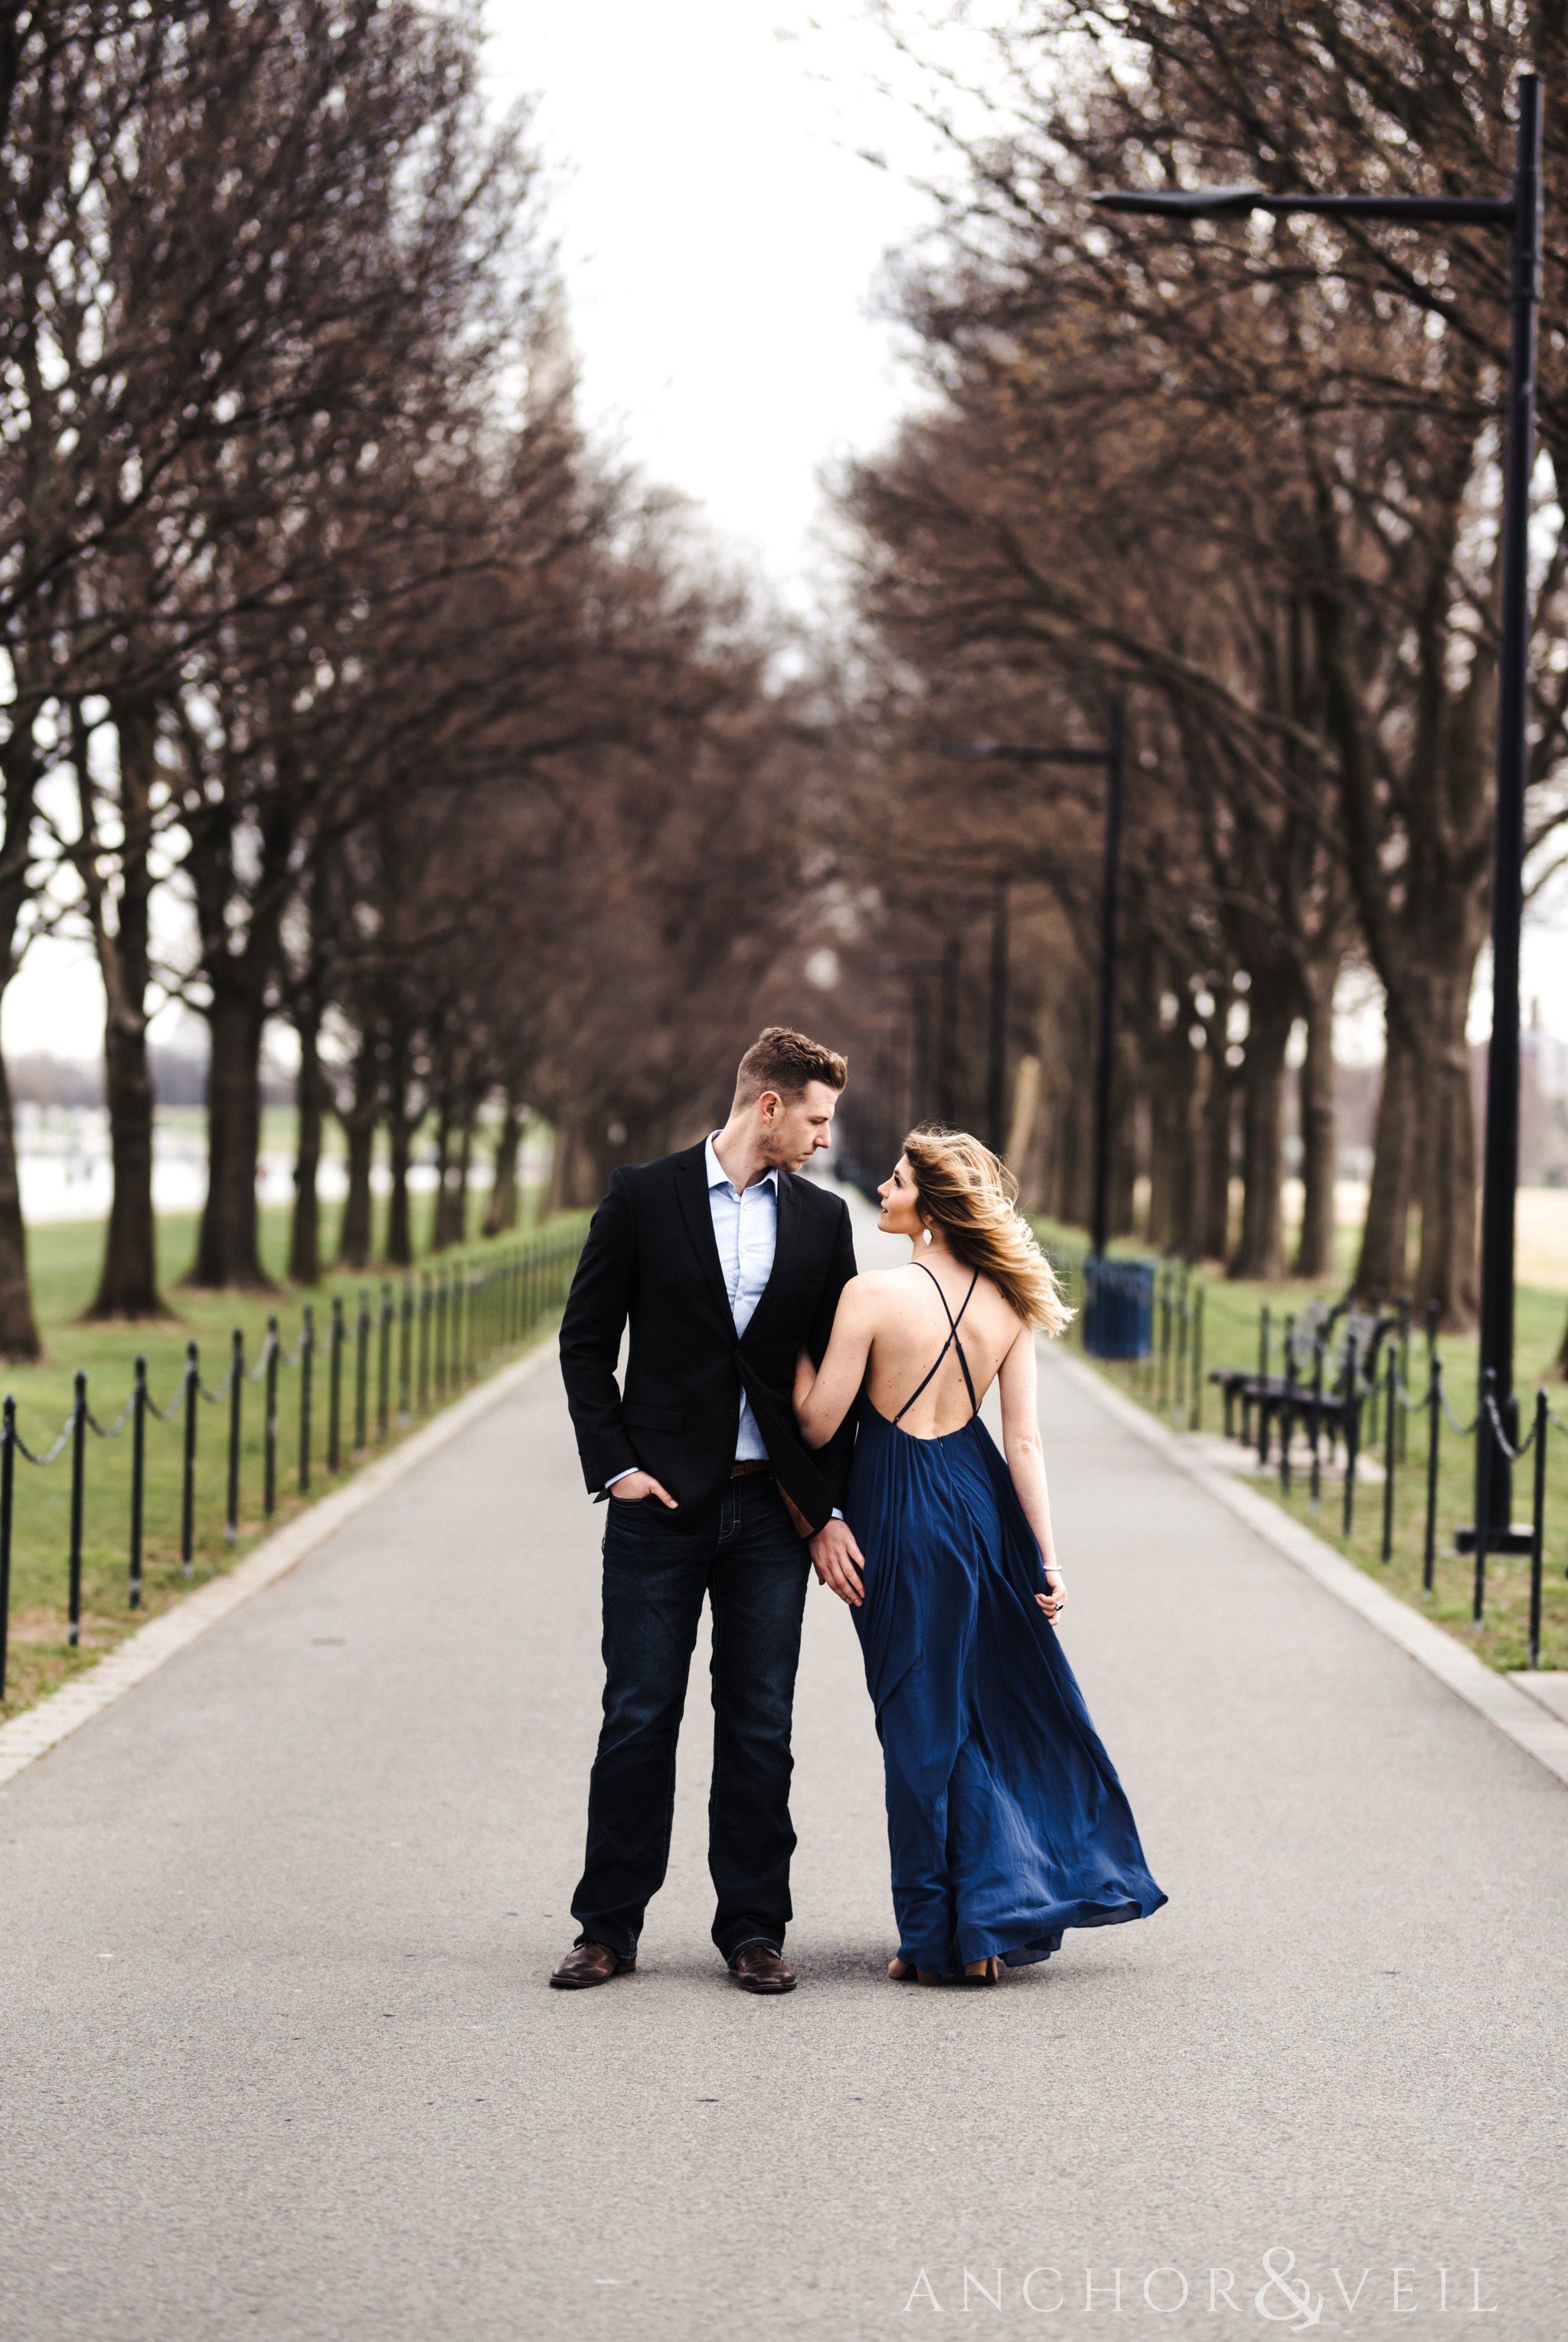 along the walkway of trees during their Scenic Washington DC Engagement Session